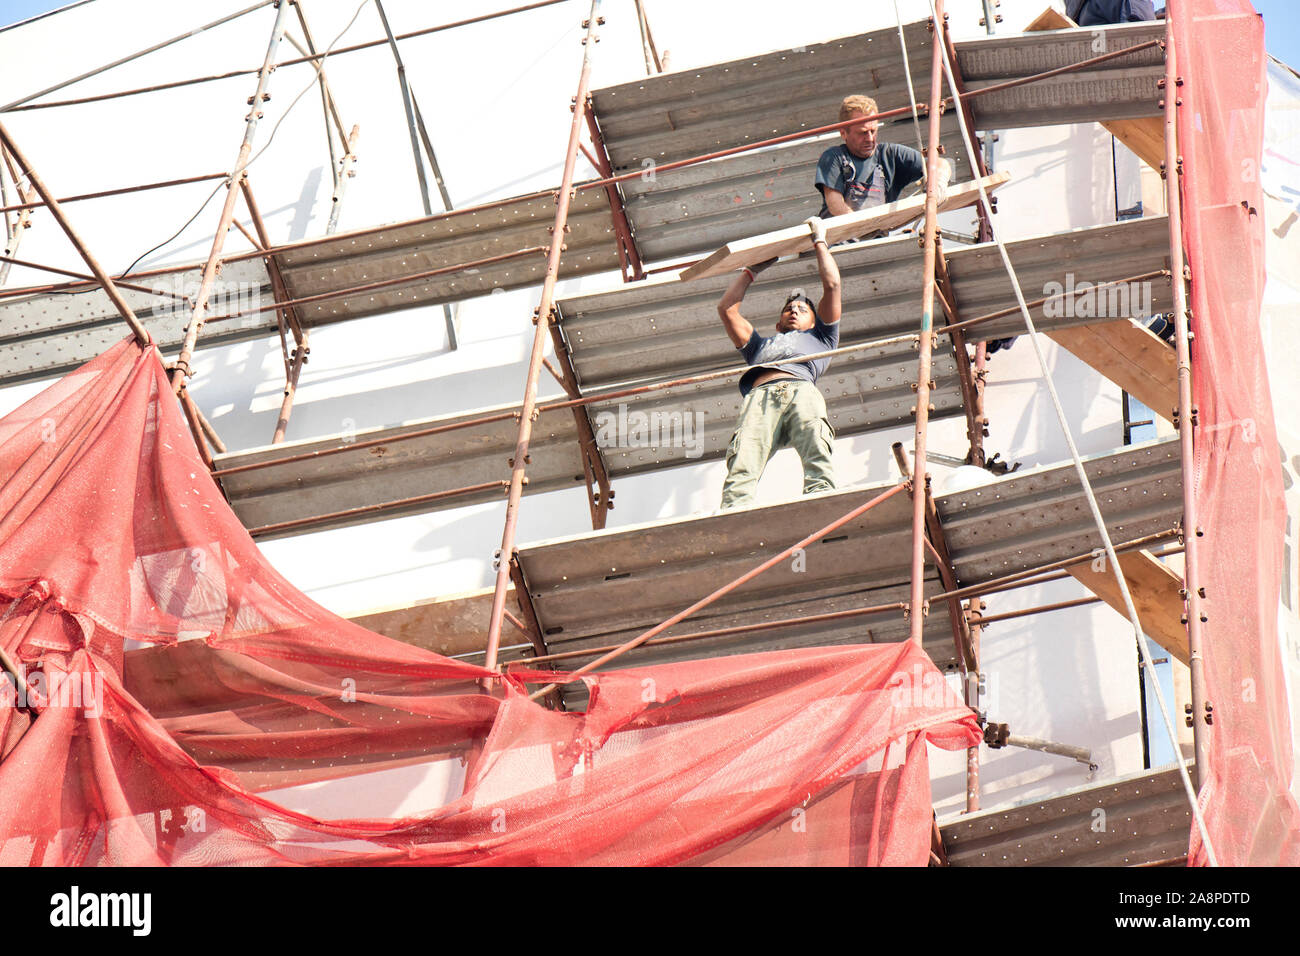 Belgrade, Serbia - October 25, 2019: Two unprotected construction workers on the scaffold during building facade reconstruction, an unsafe, hazard  an Stock Photo